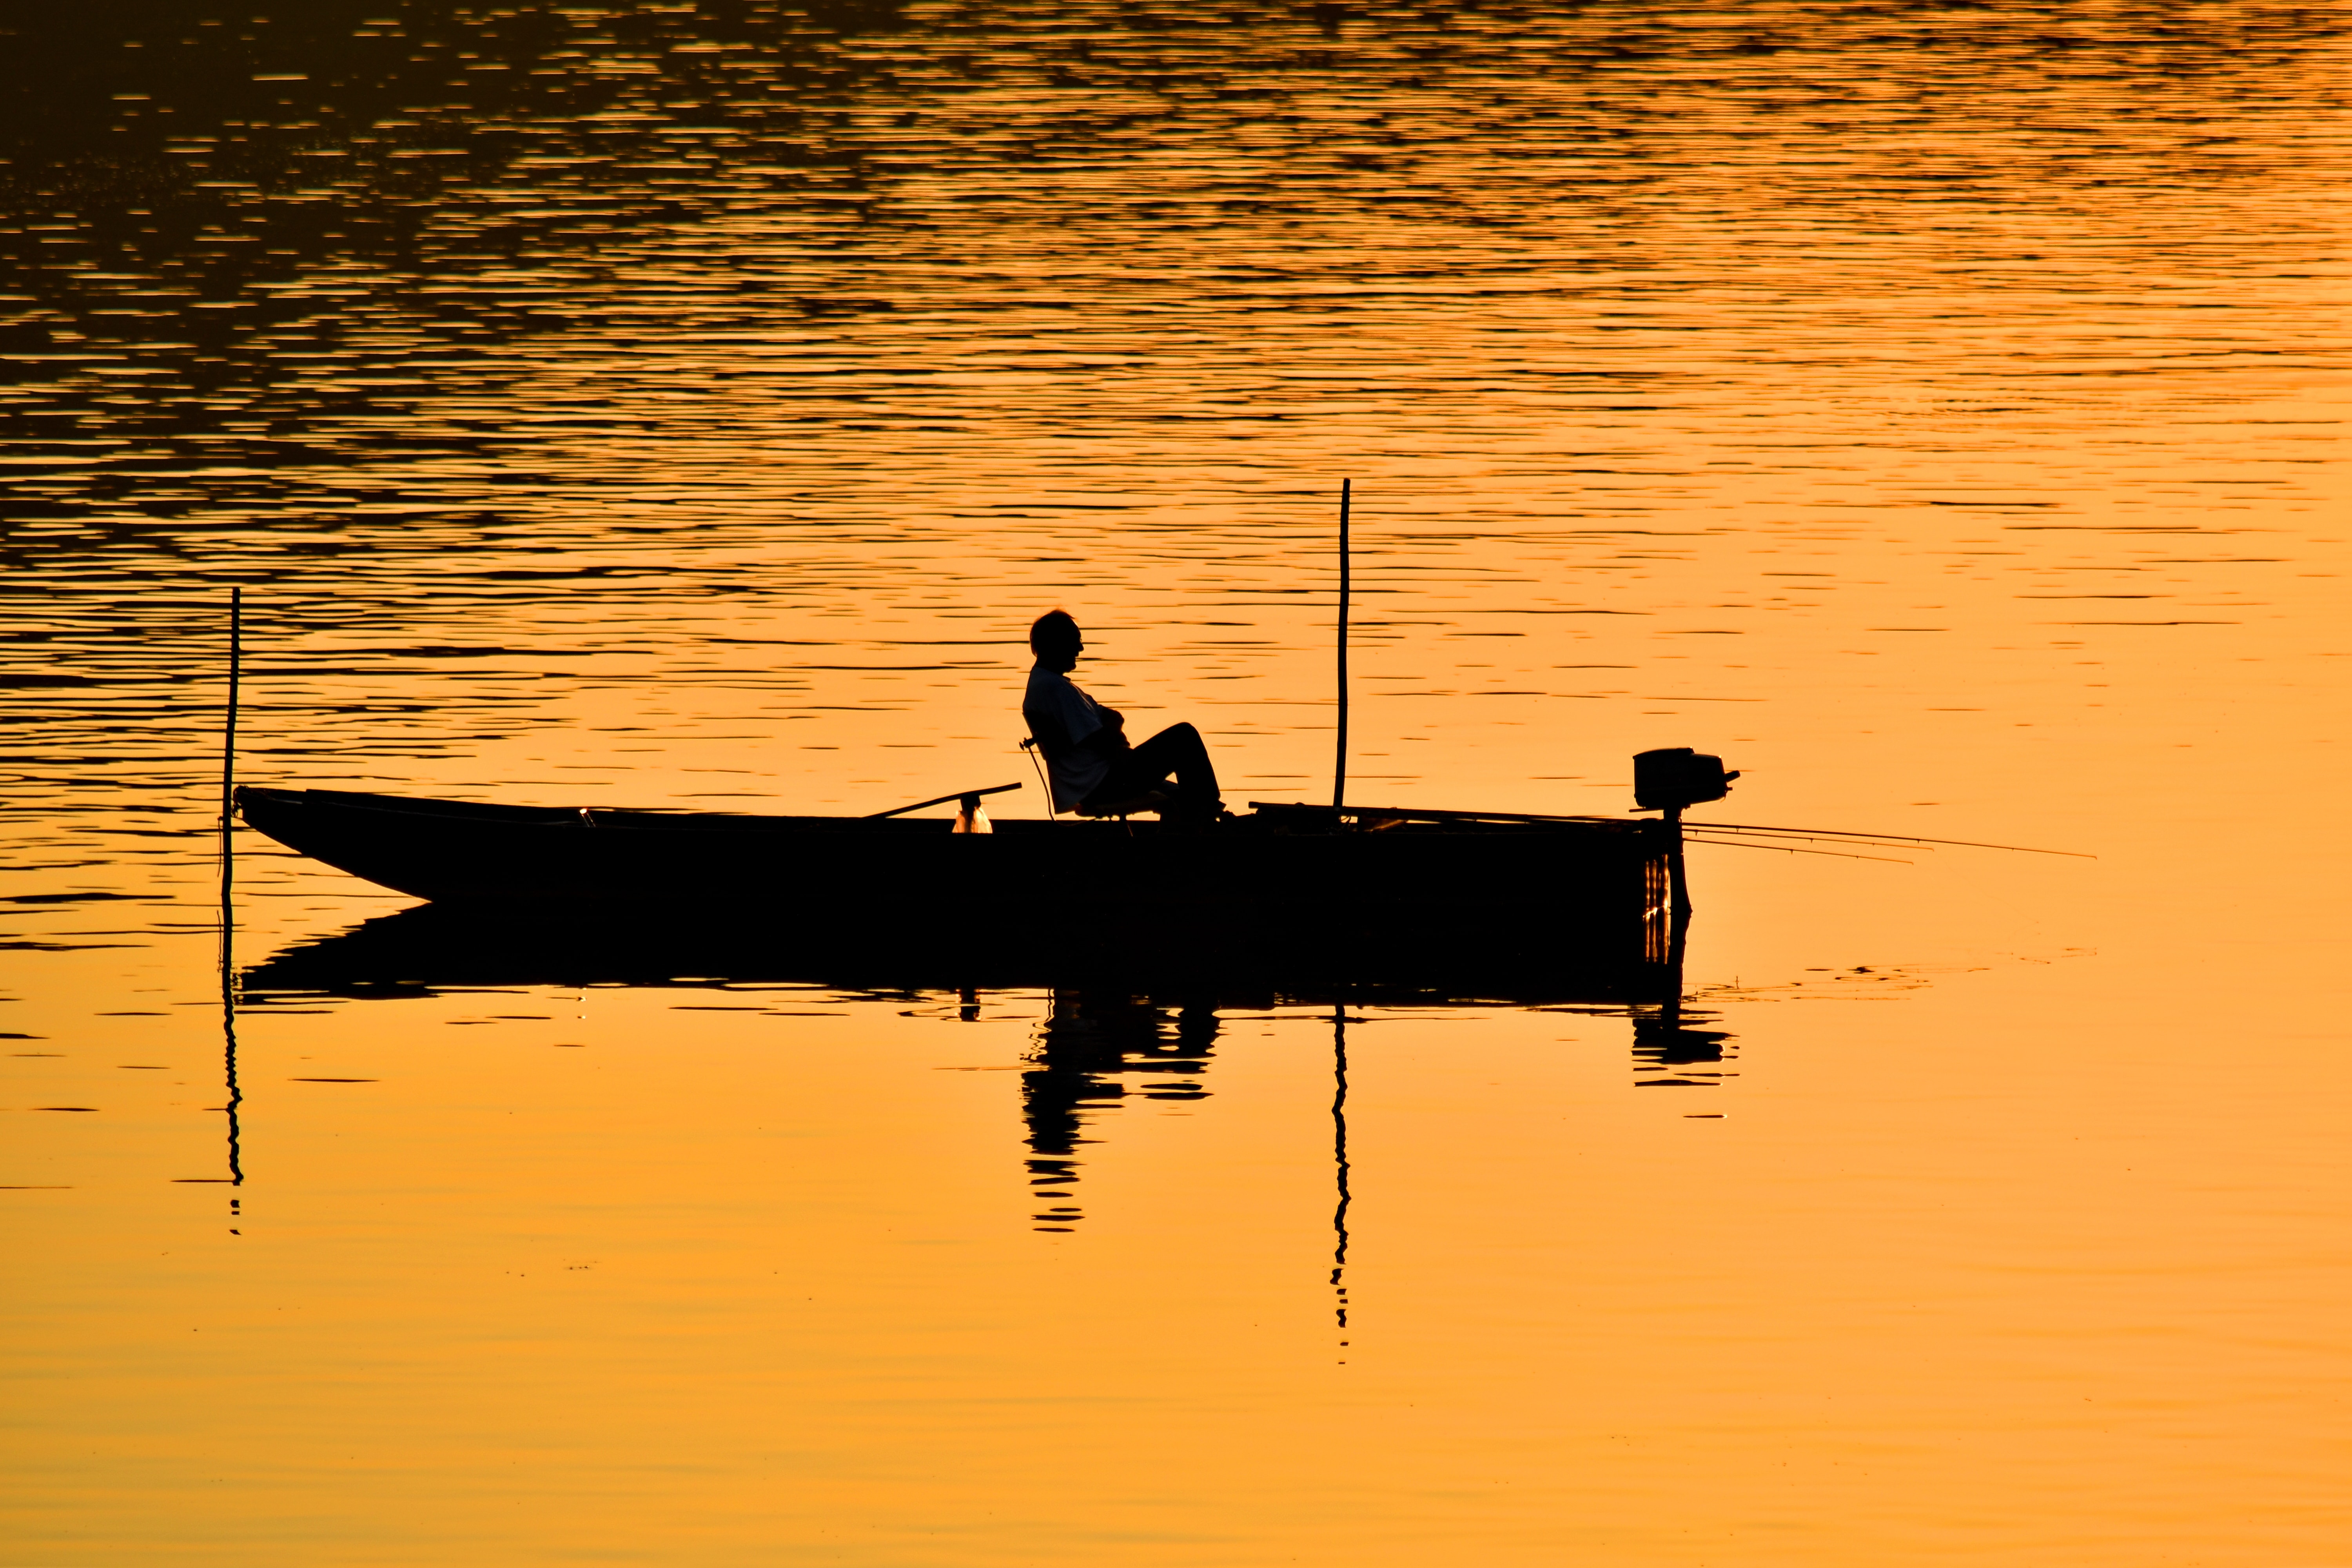 Free picture: boat, calm, fisherman, relaxation, silhouette, sunset ...